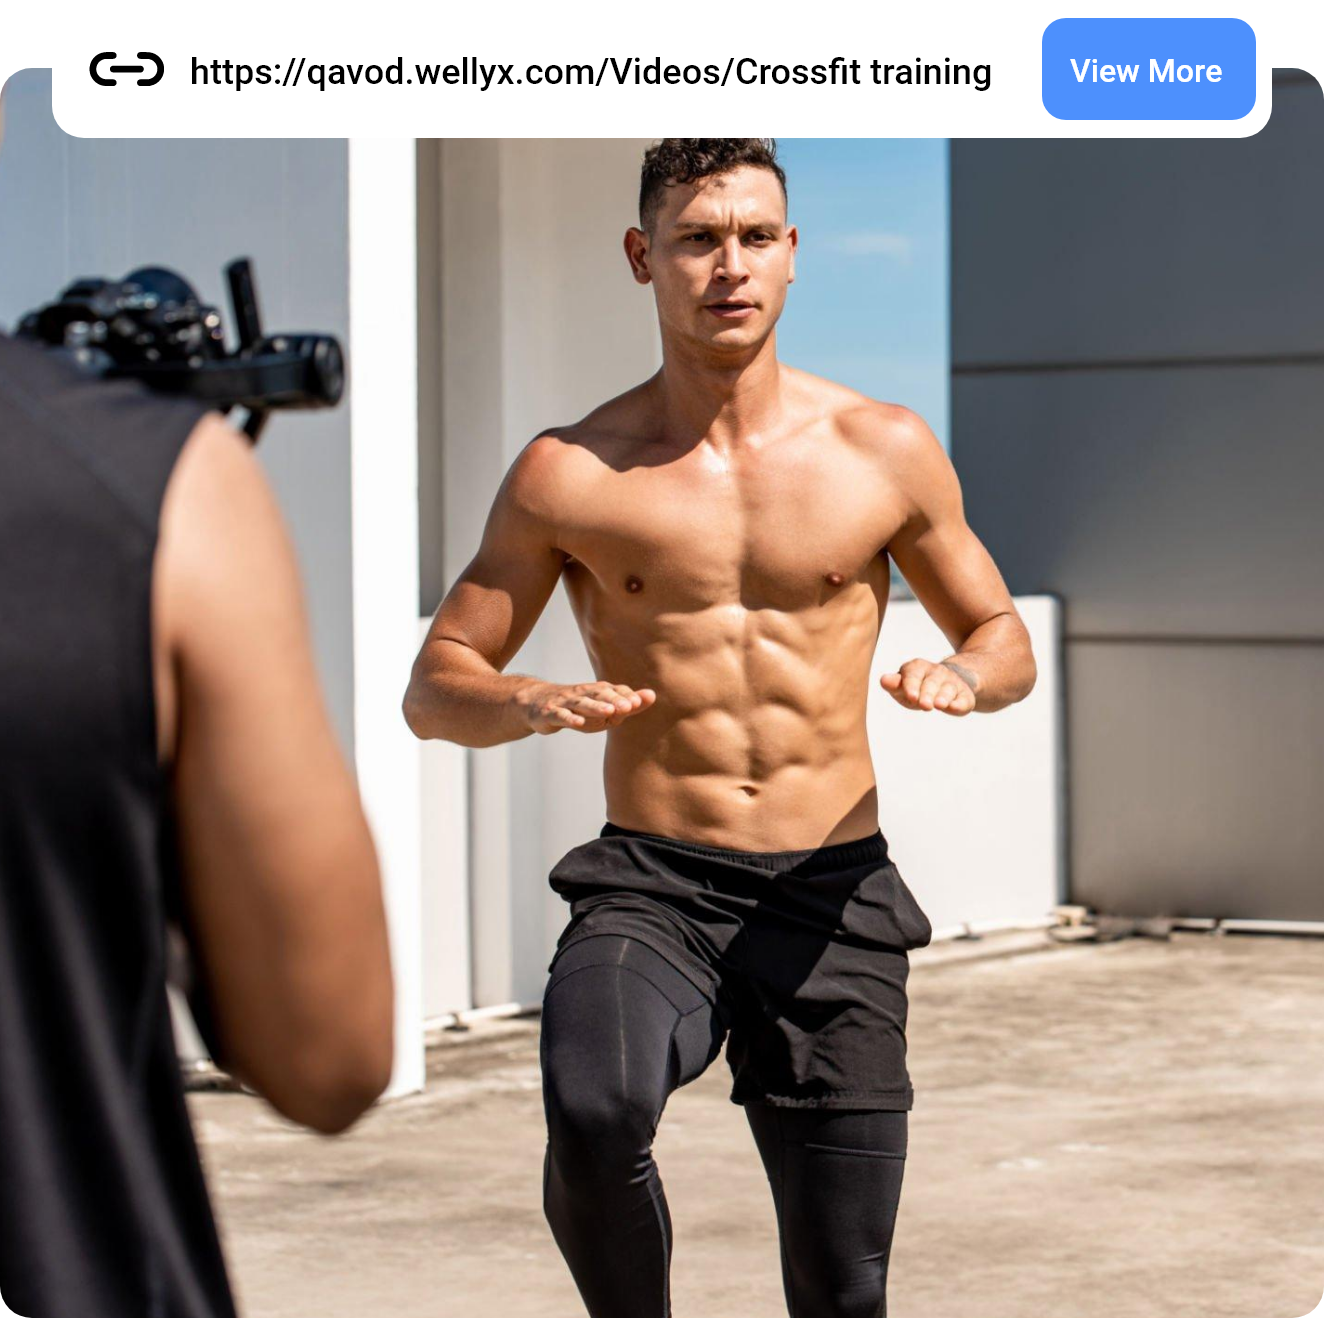 Gym software with video categorization feature